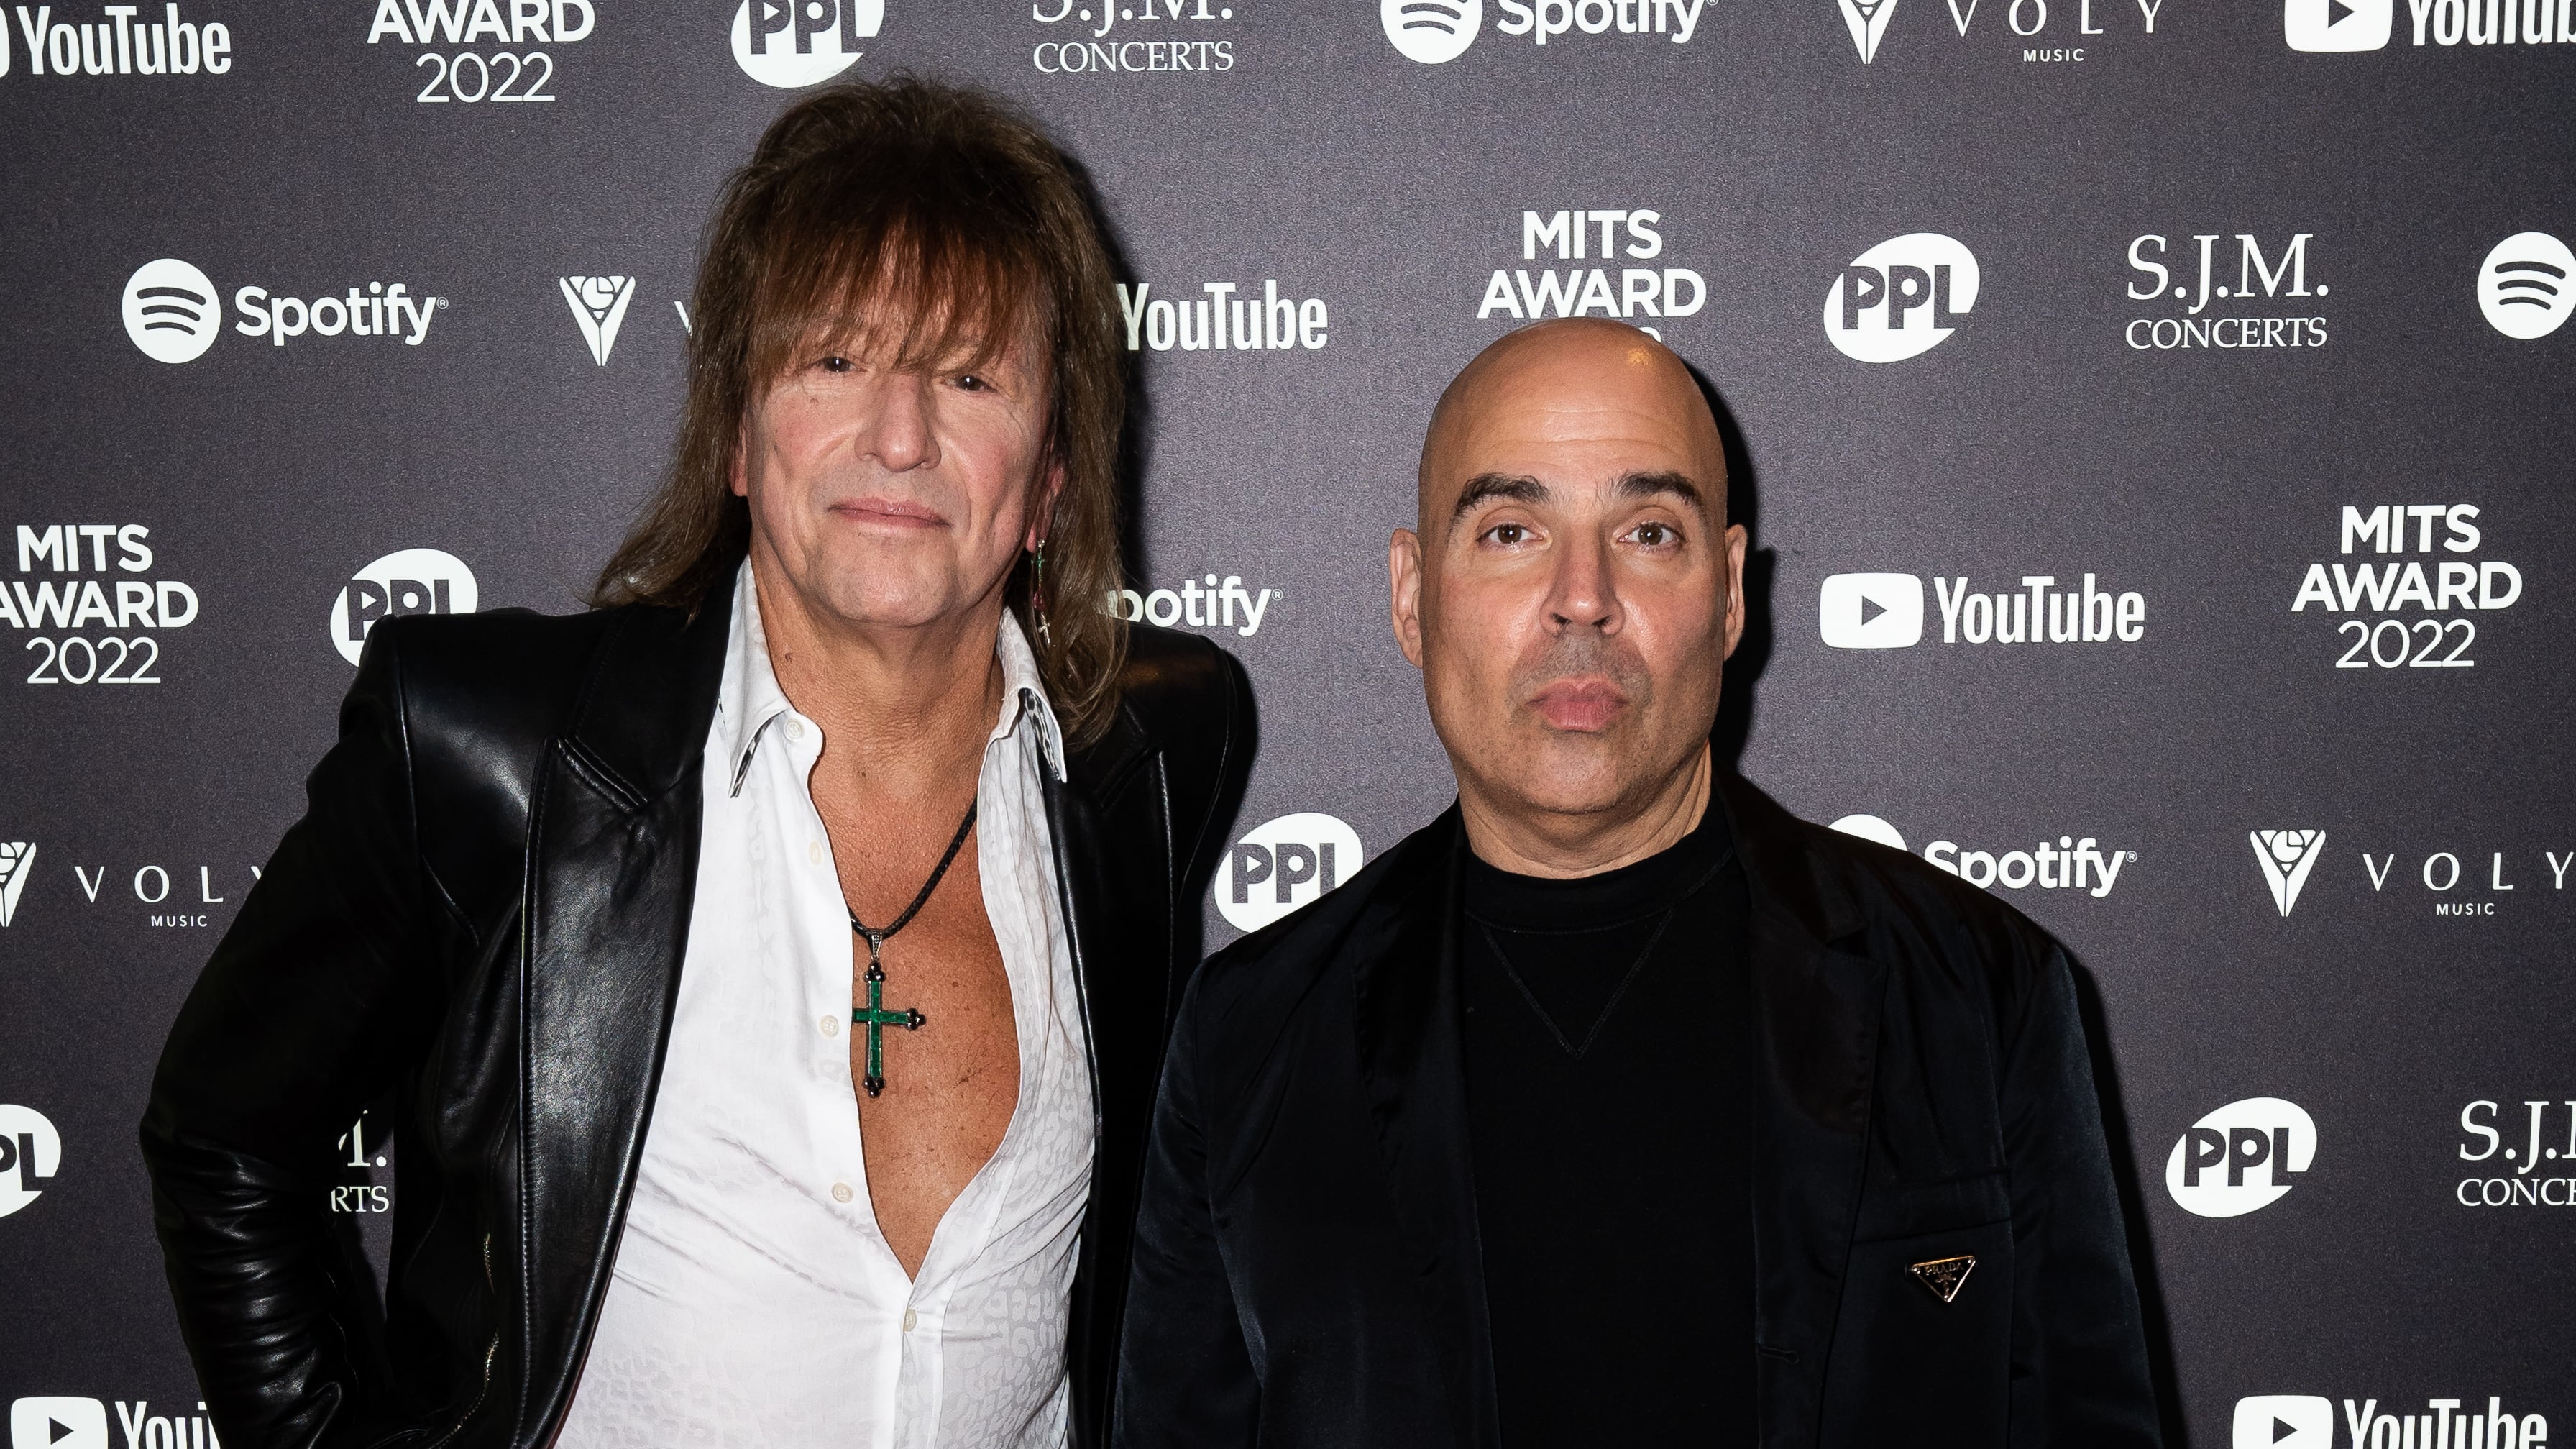 The founder of Hipgnosis Songs Management has announced he is stepping down as its chairman